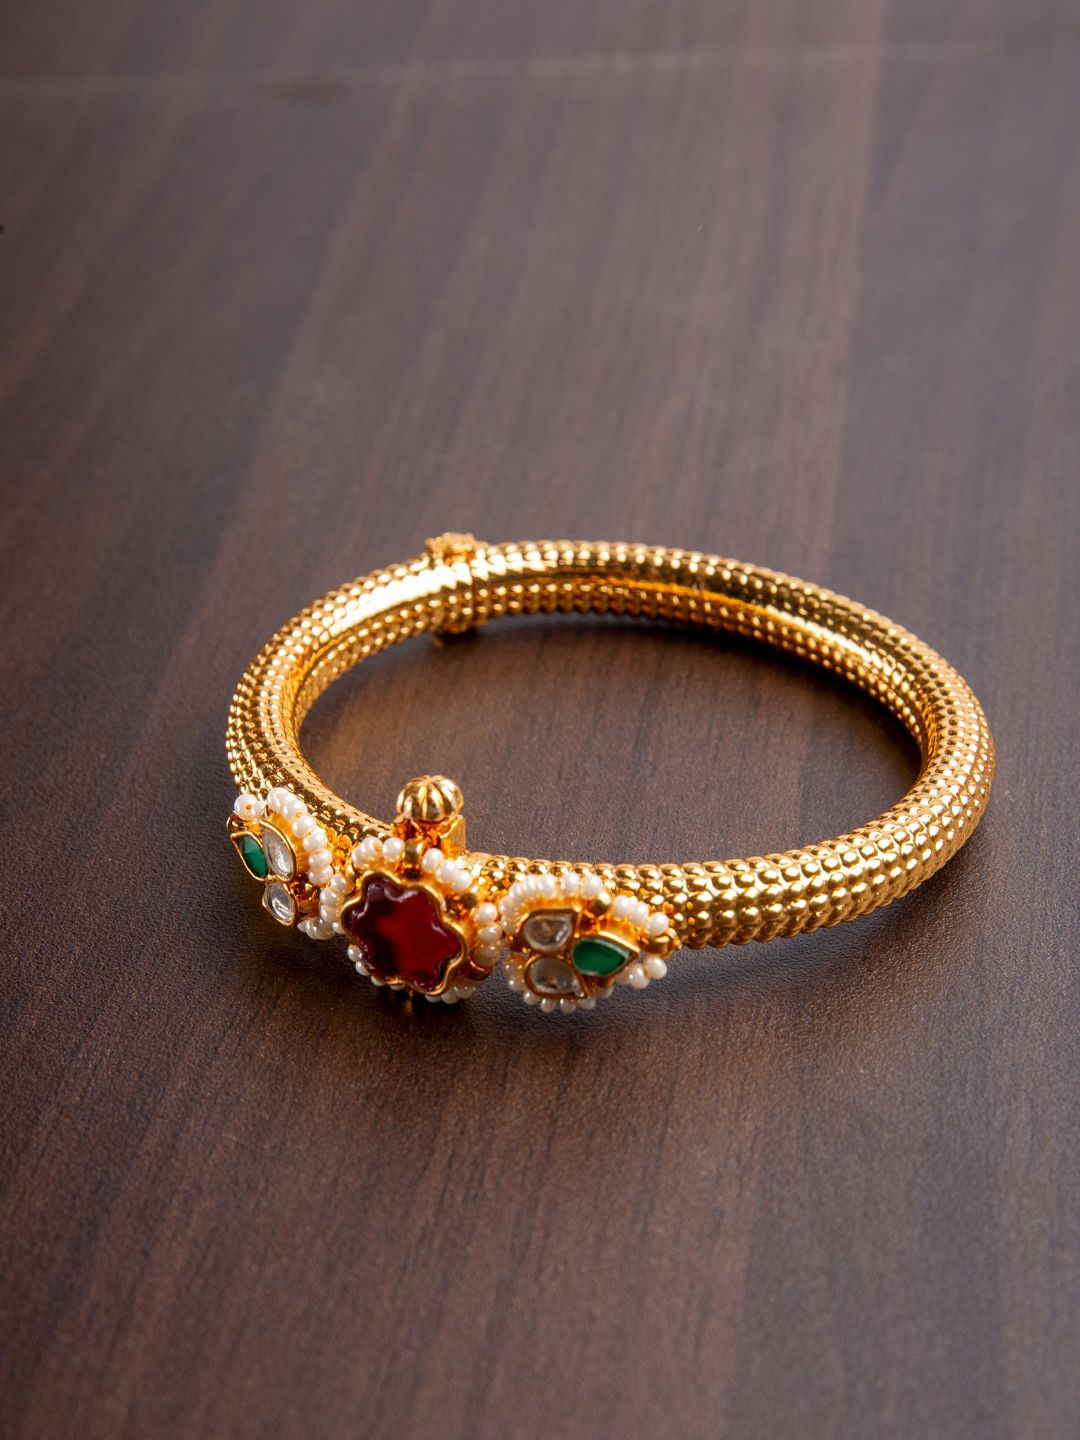 MORKANTH JEWELLERY Red & Green Gold-Plated Handcrafted Kada Bracelet Price in India